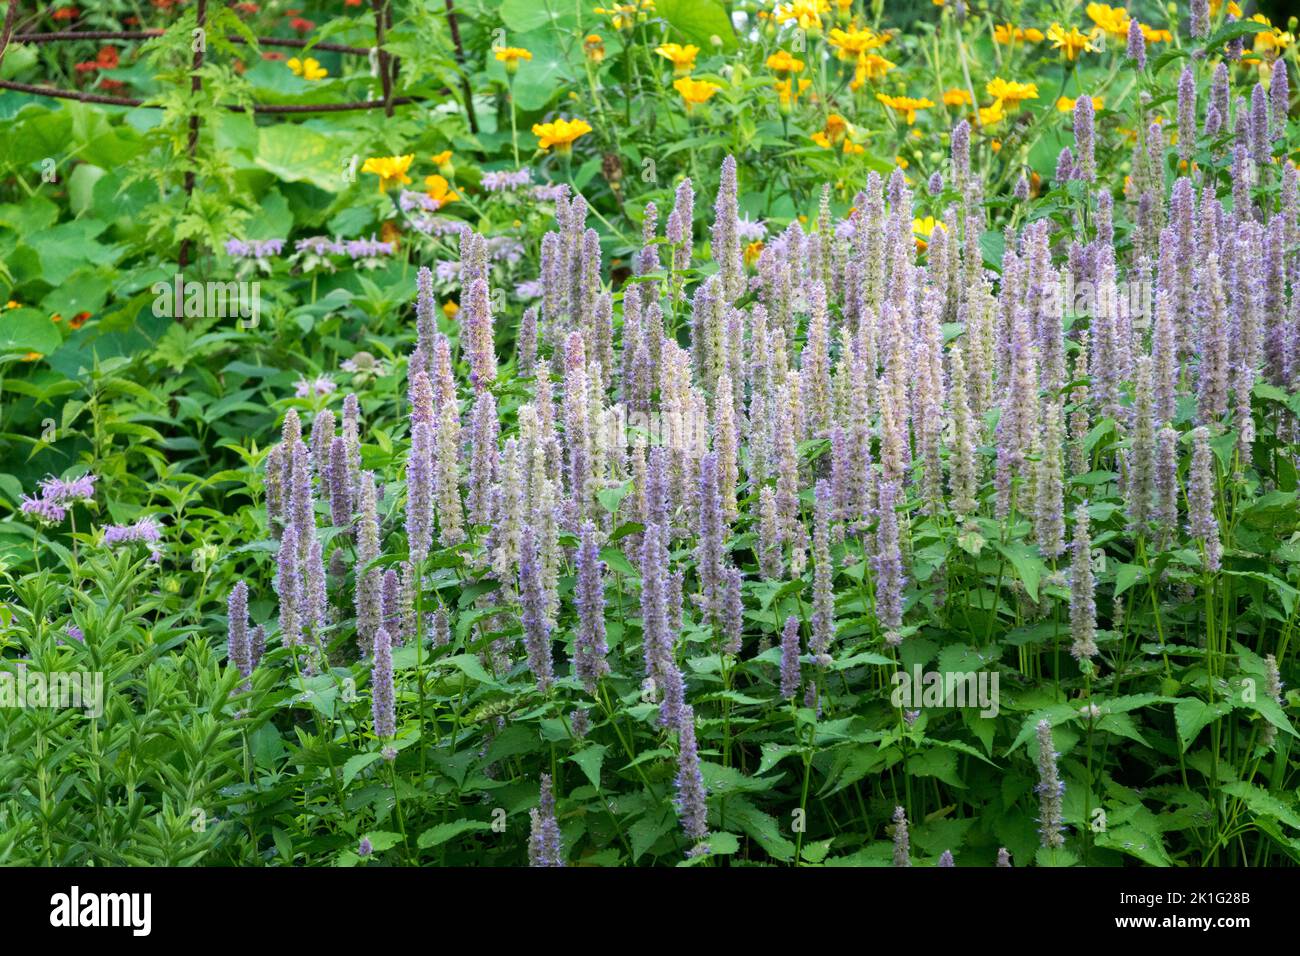 Medicinal herbs, Agastache mexicana, Anise Hyssop, Medicinal garden, Giant Hyssop, Plant blooming Stock Photo